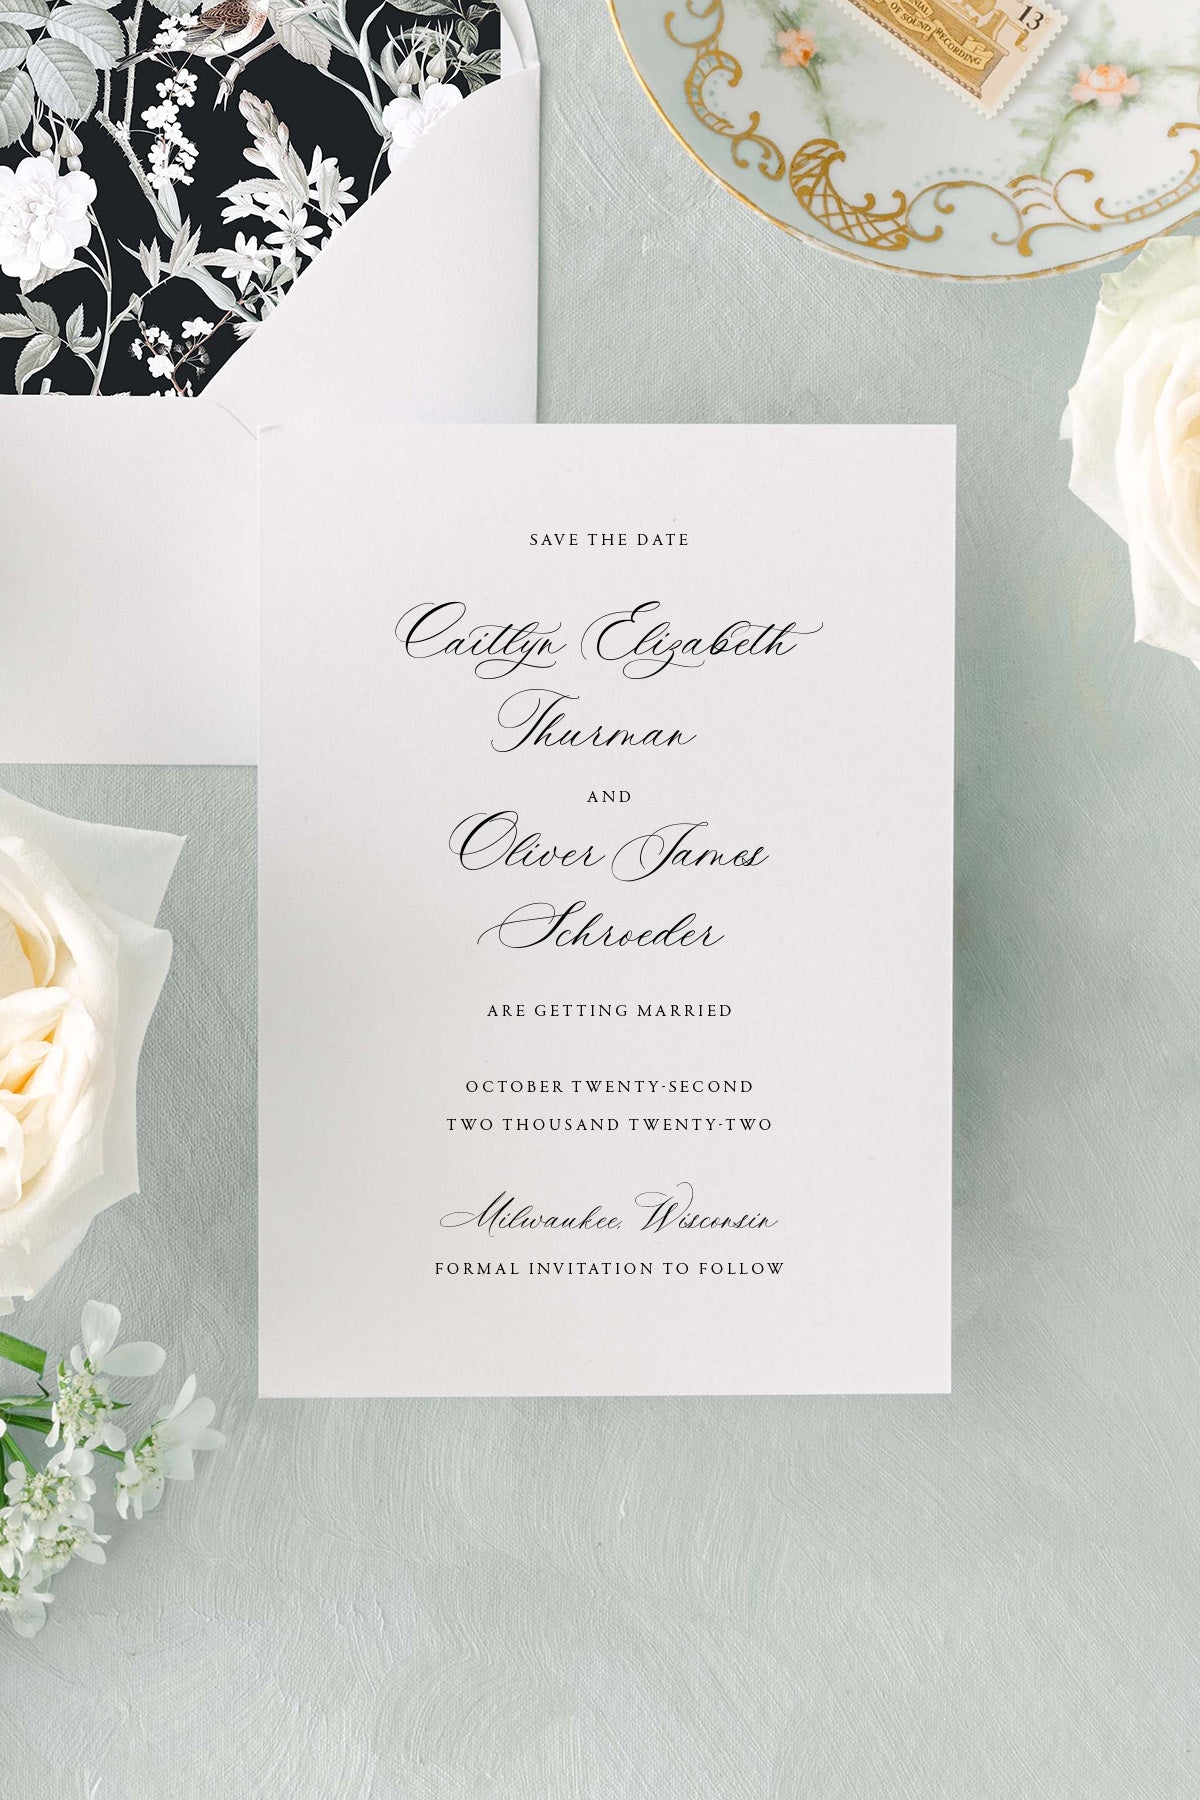 Classic Save The Date Cards Lily Roe Co.